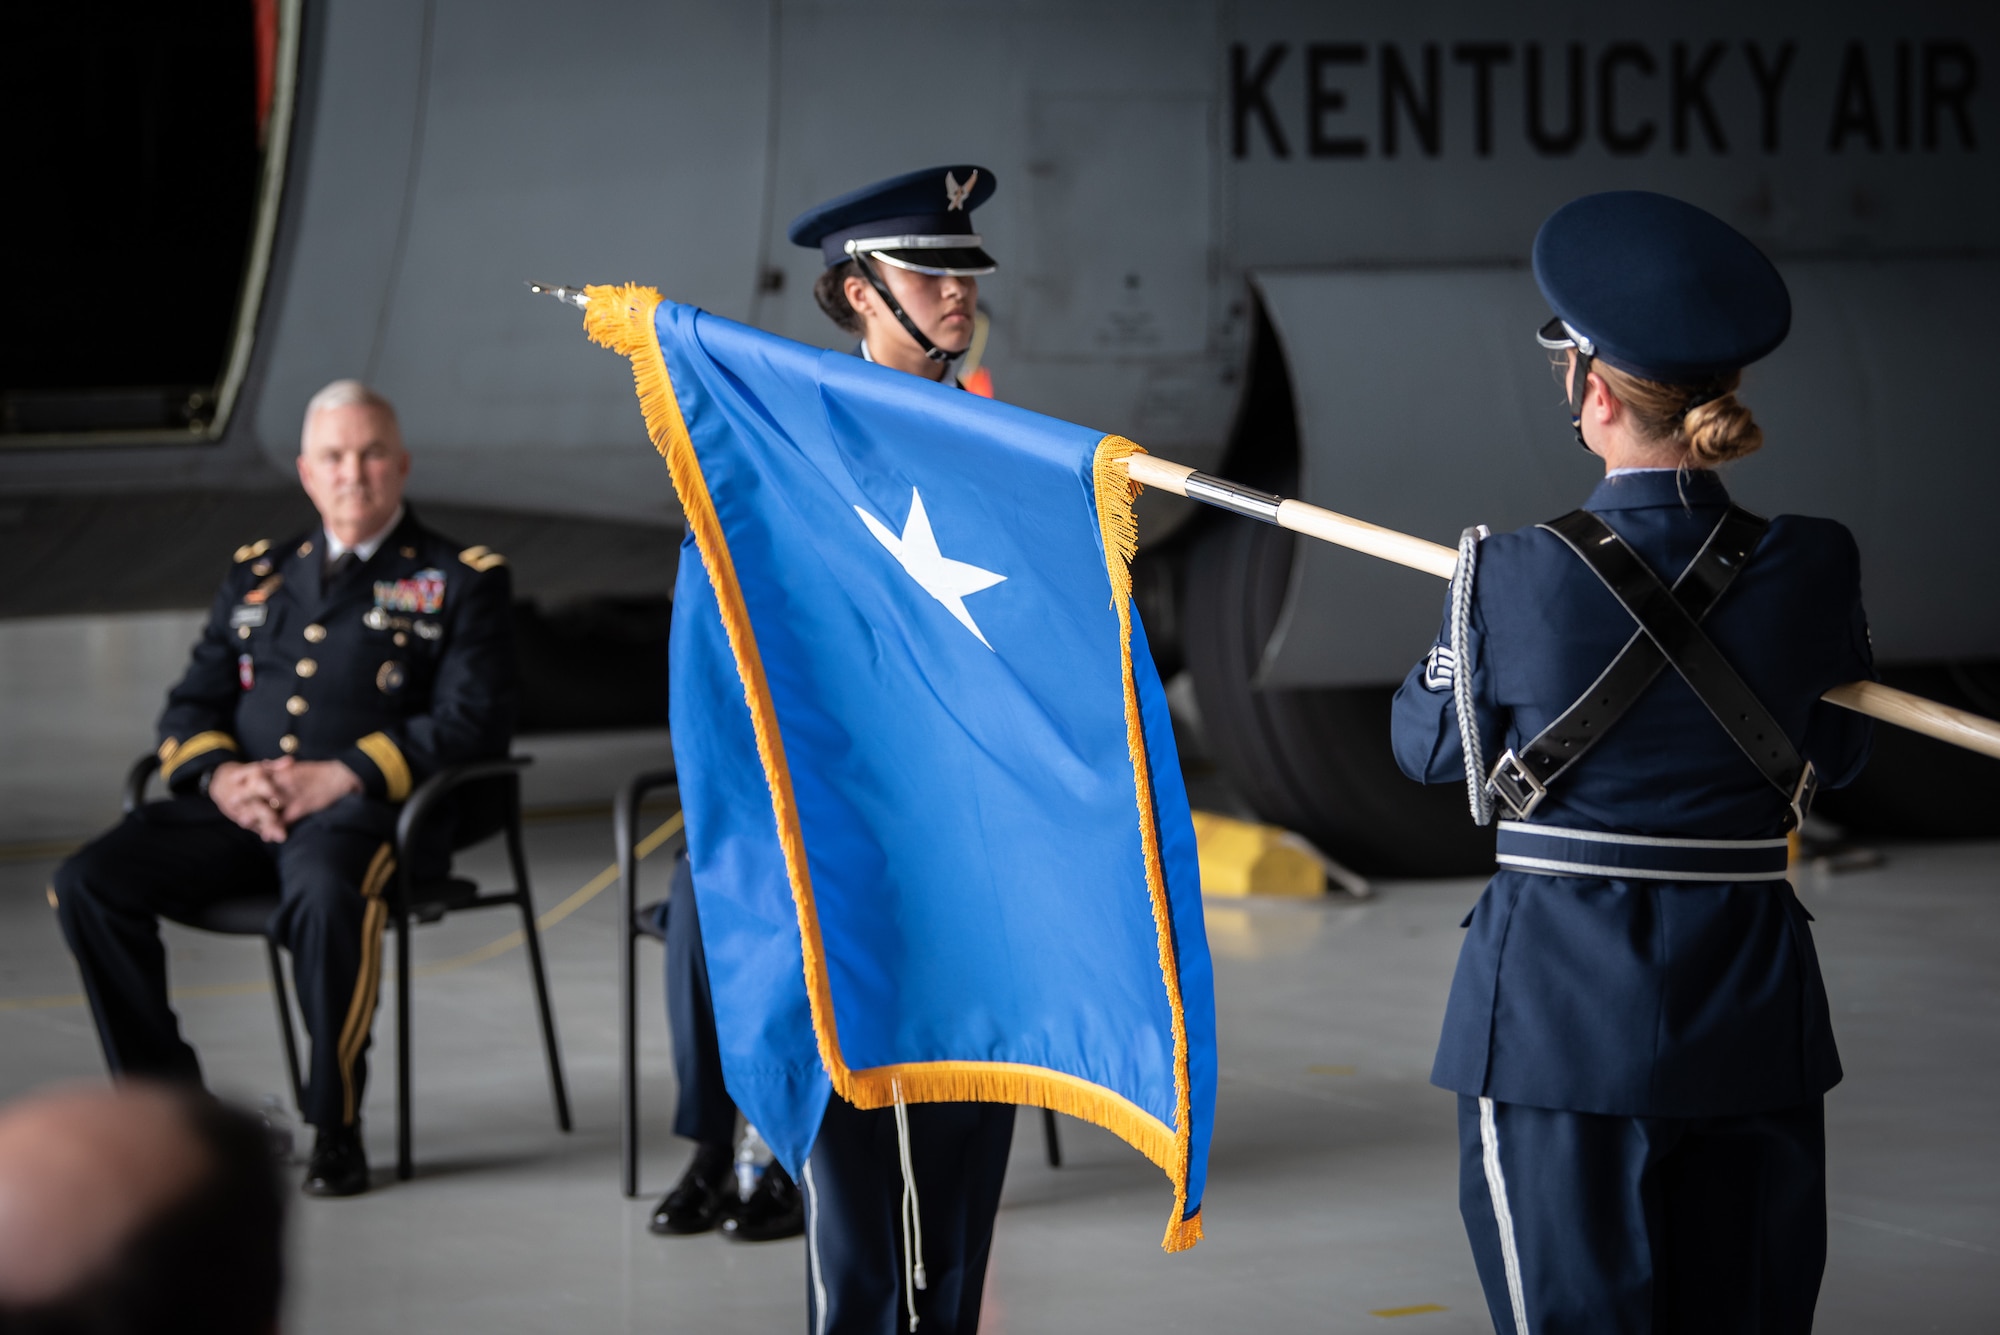 Members of the 123rd Airlift Wing Color Guard unfurl the personal flag of Brig. Gen. Mary S. Decker, chief of staff for Joint Force Headquarters — Air, Kentucky National Guard, during her promotion ceremony June 11, 2022, at the Kentucky Air National Guard Base in Louisville, Ky. Decker joined the Air Force in 1987 as an airman basic. (U.S. Air National Guard photo by Dale Greer)